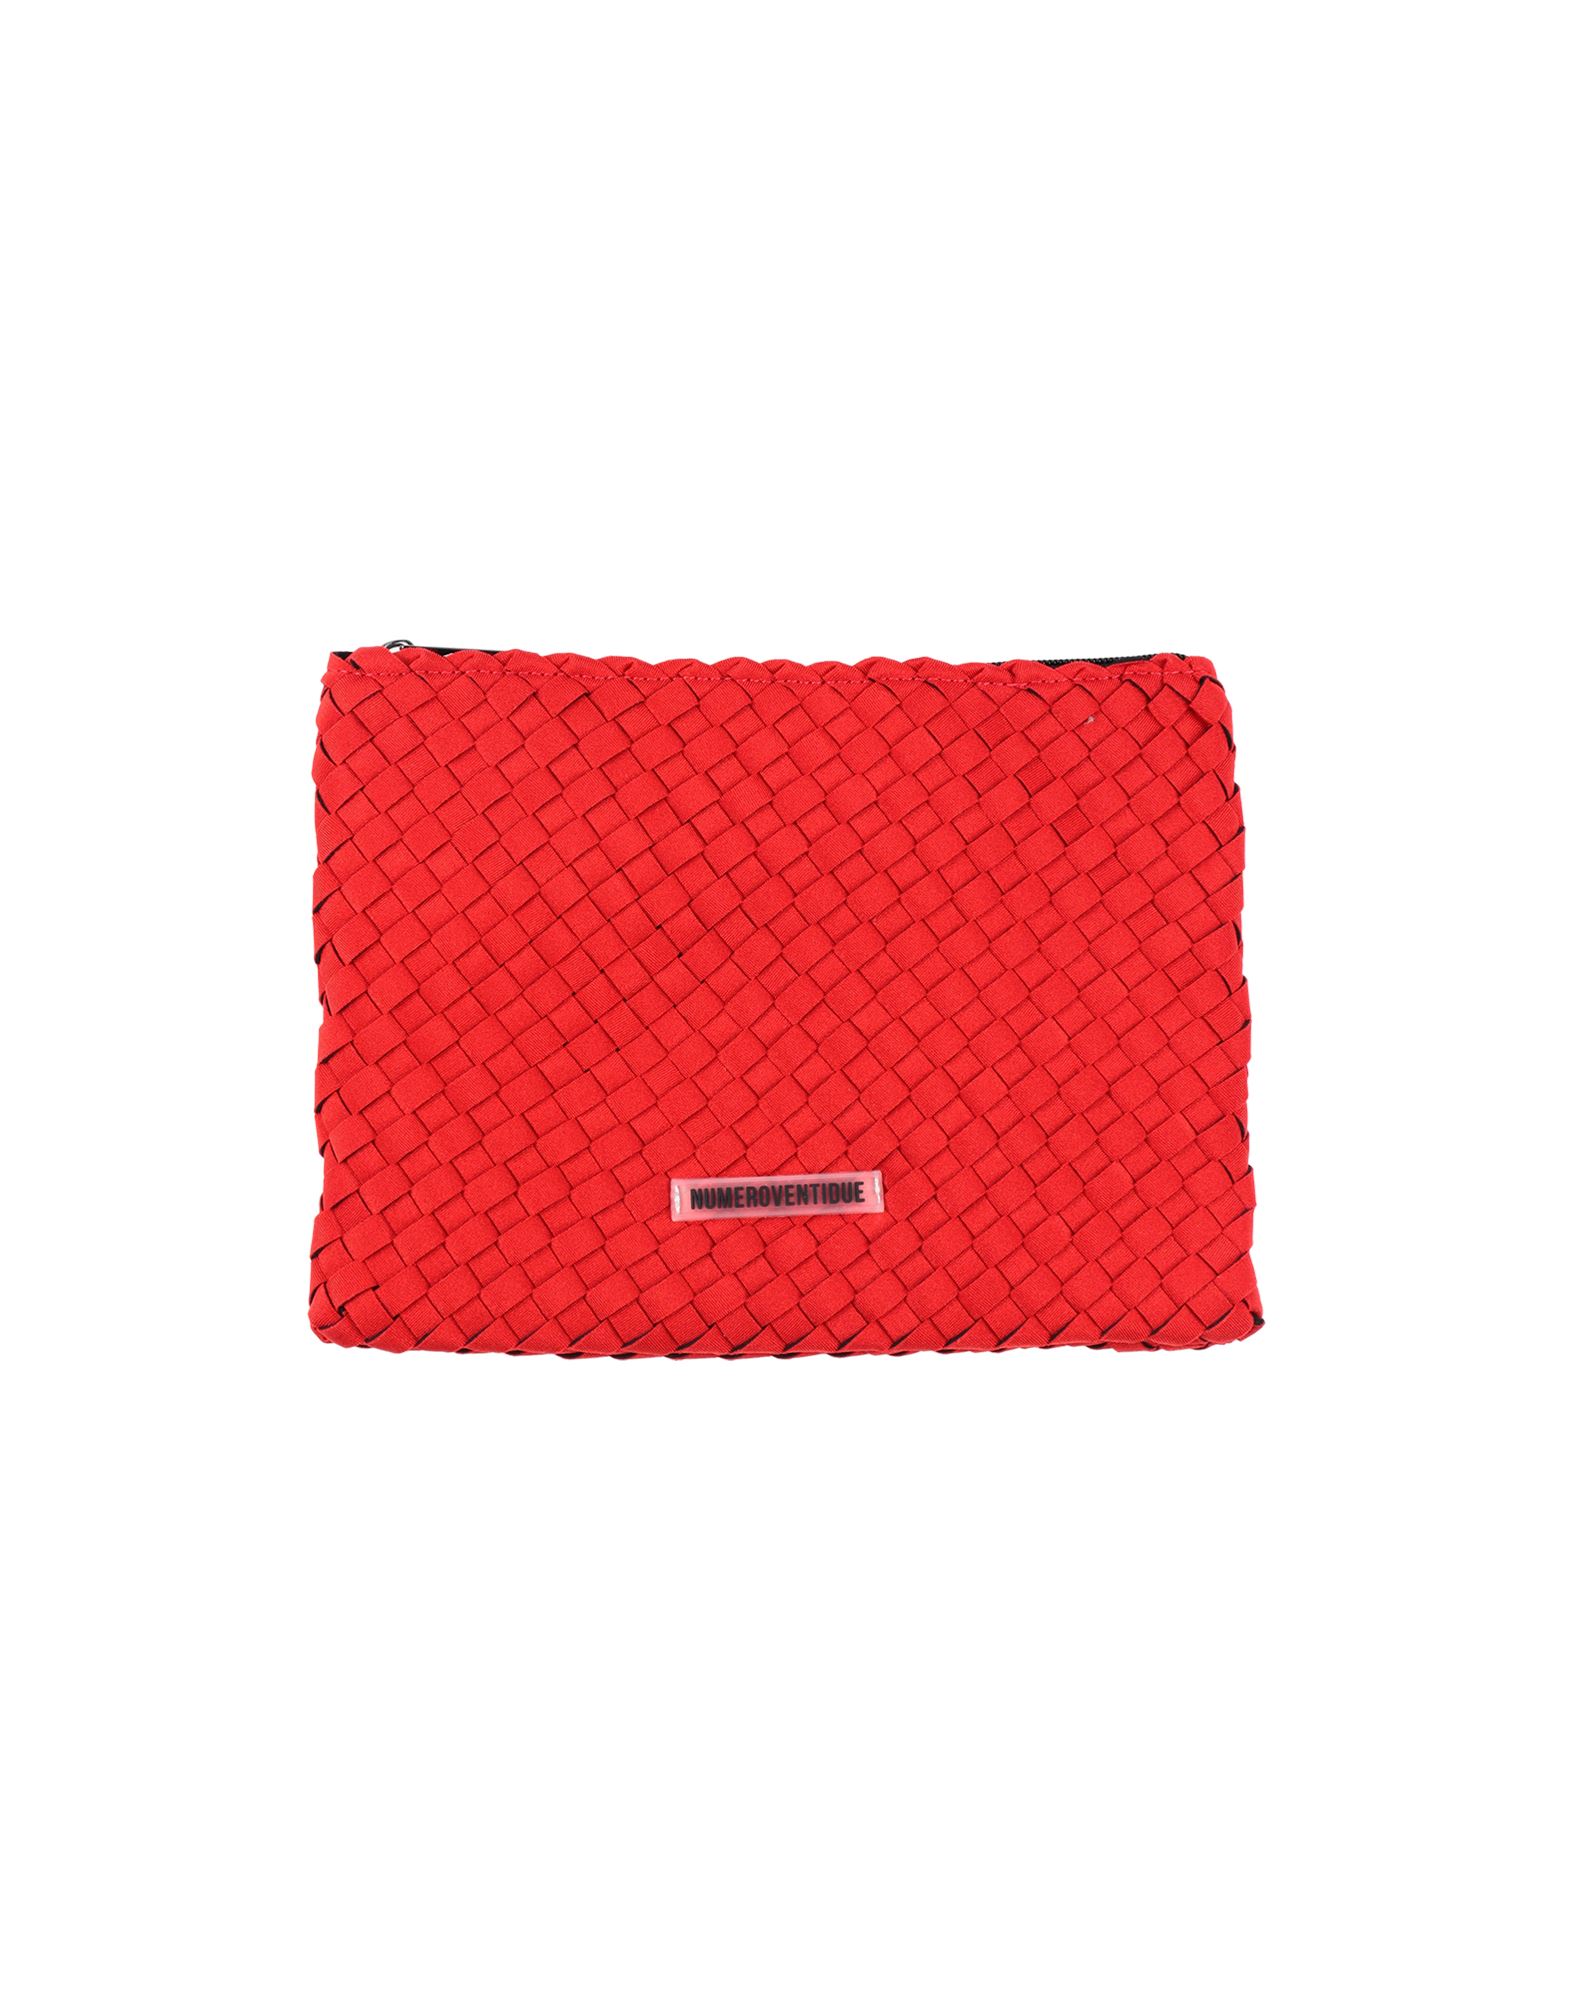 Numeroventidue Pouches In Red